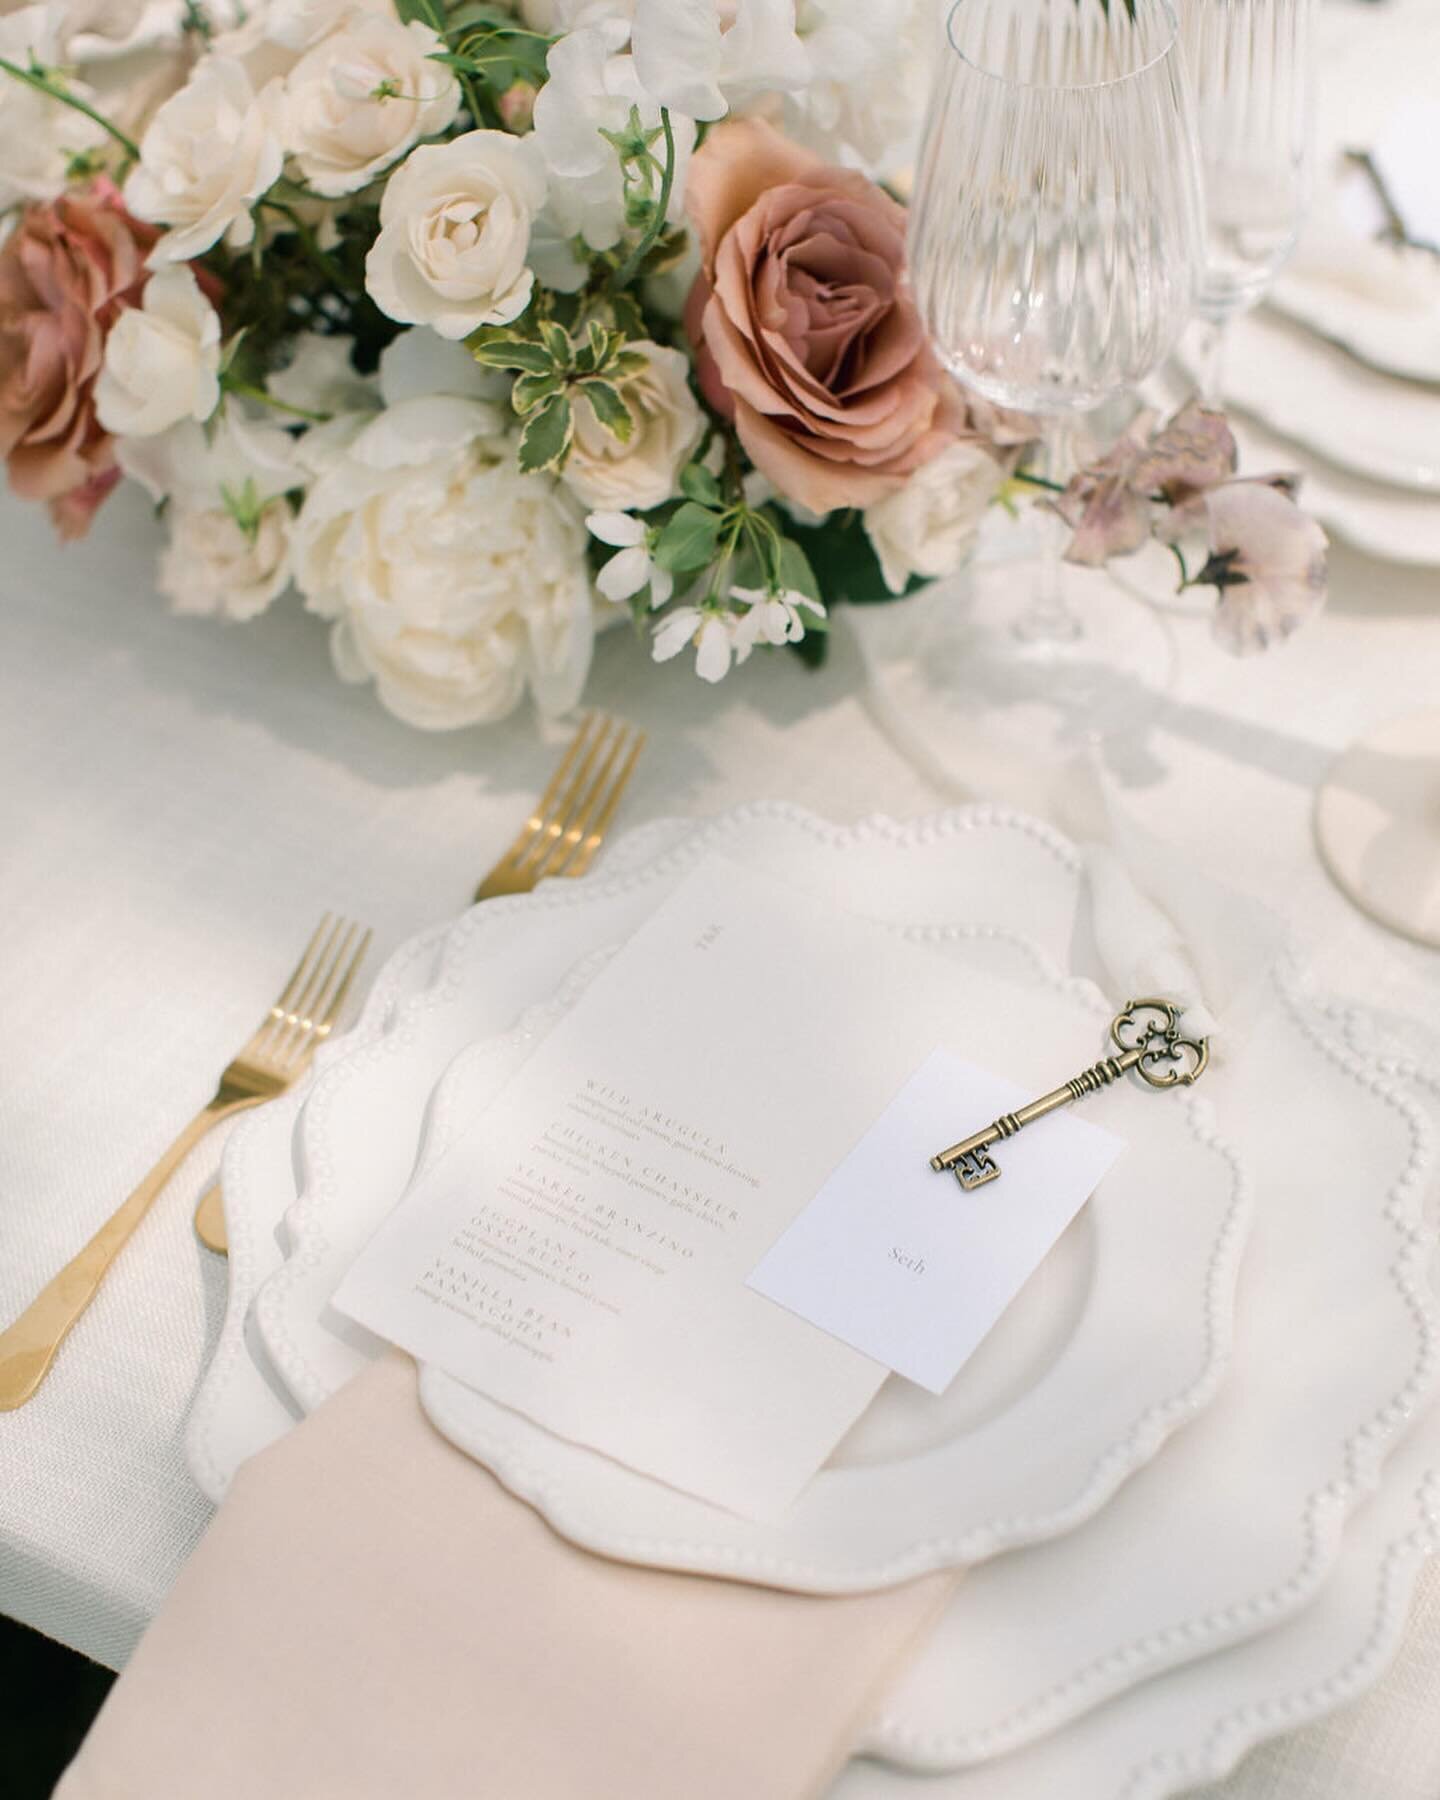 Whimsical and Romantic all wrapped up into one. 

Event planning &amp; design: @kasiaware 
Photographer: @madisonrosephoto 
Venue: @ruthvenparknhs 
Florist: @evyrosedesignco 
Stationery: @statuerue 
Rentals: @simplybeautifuldecor 

#kasiaware #eventp